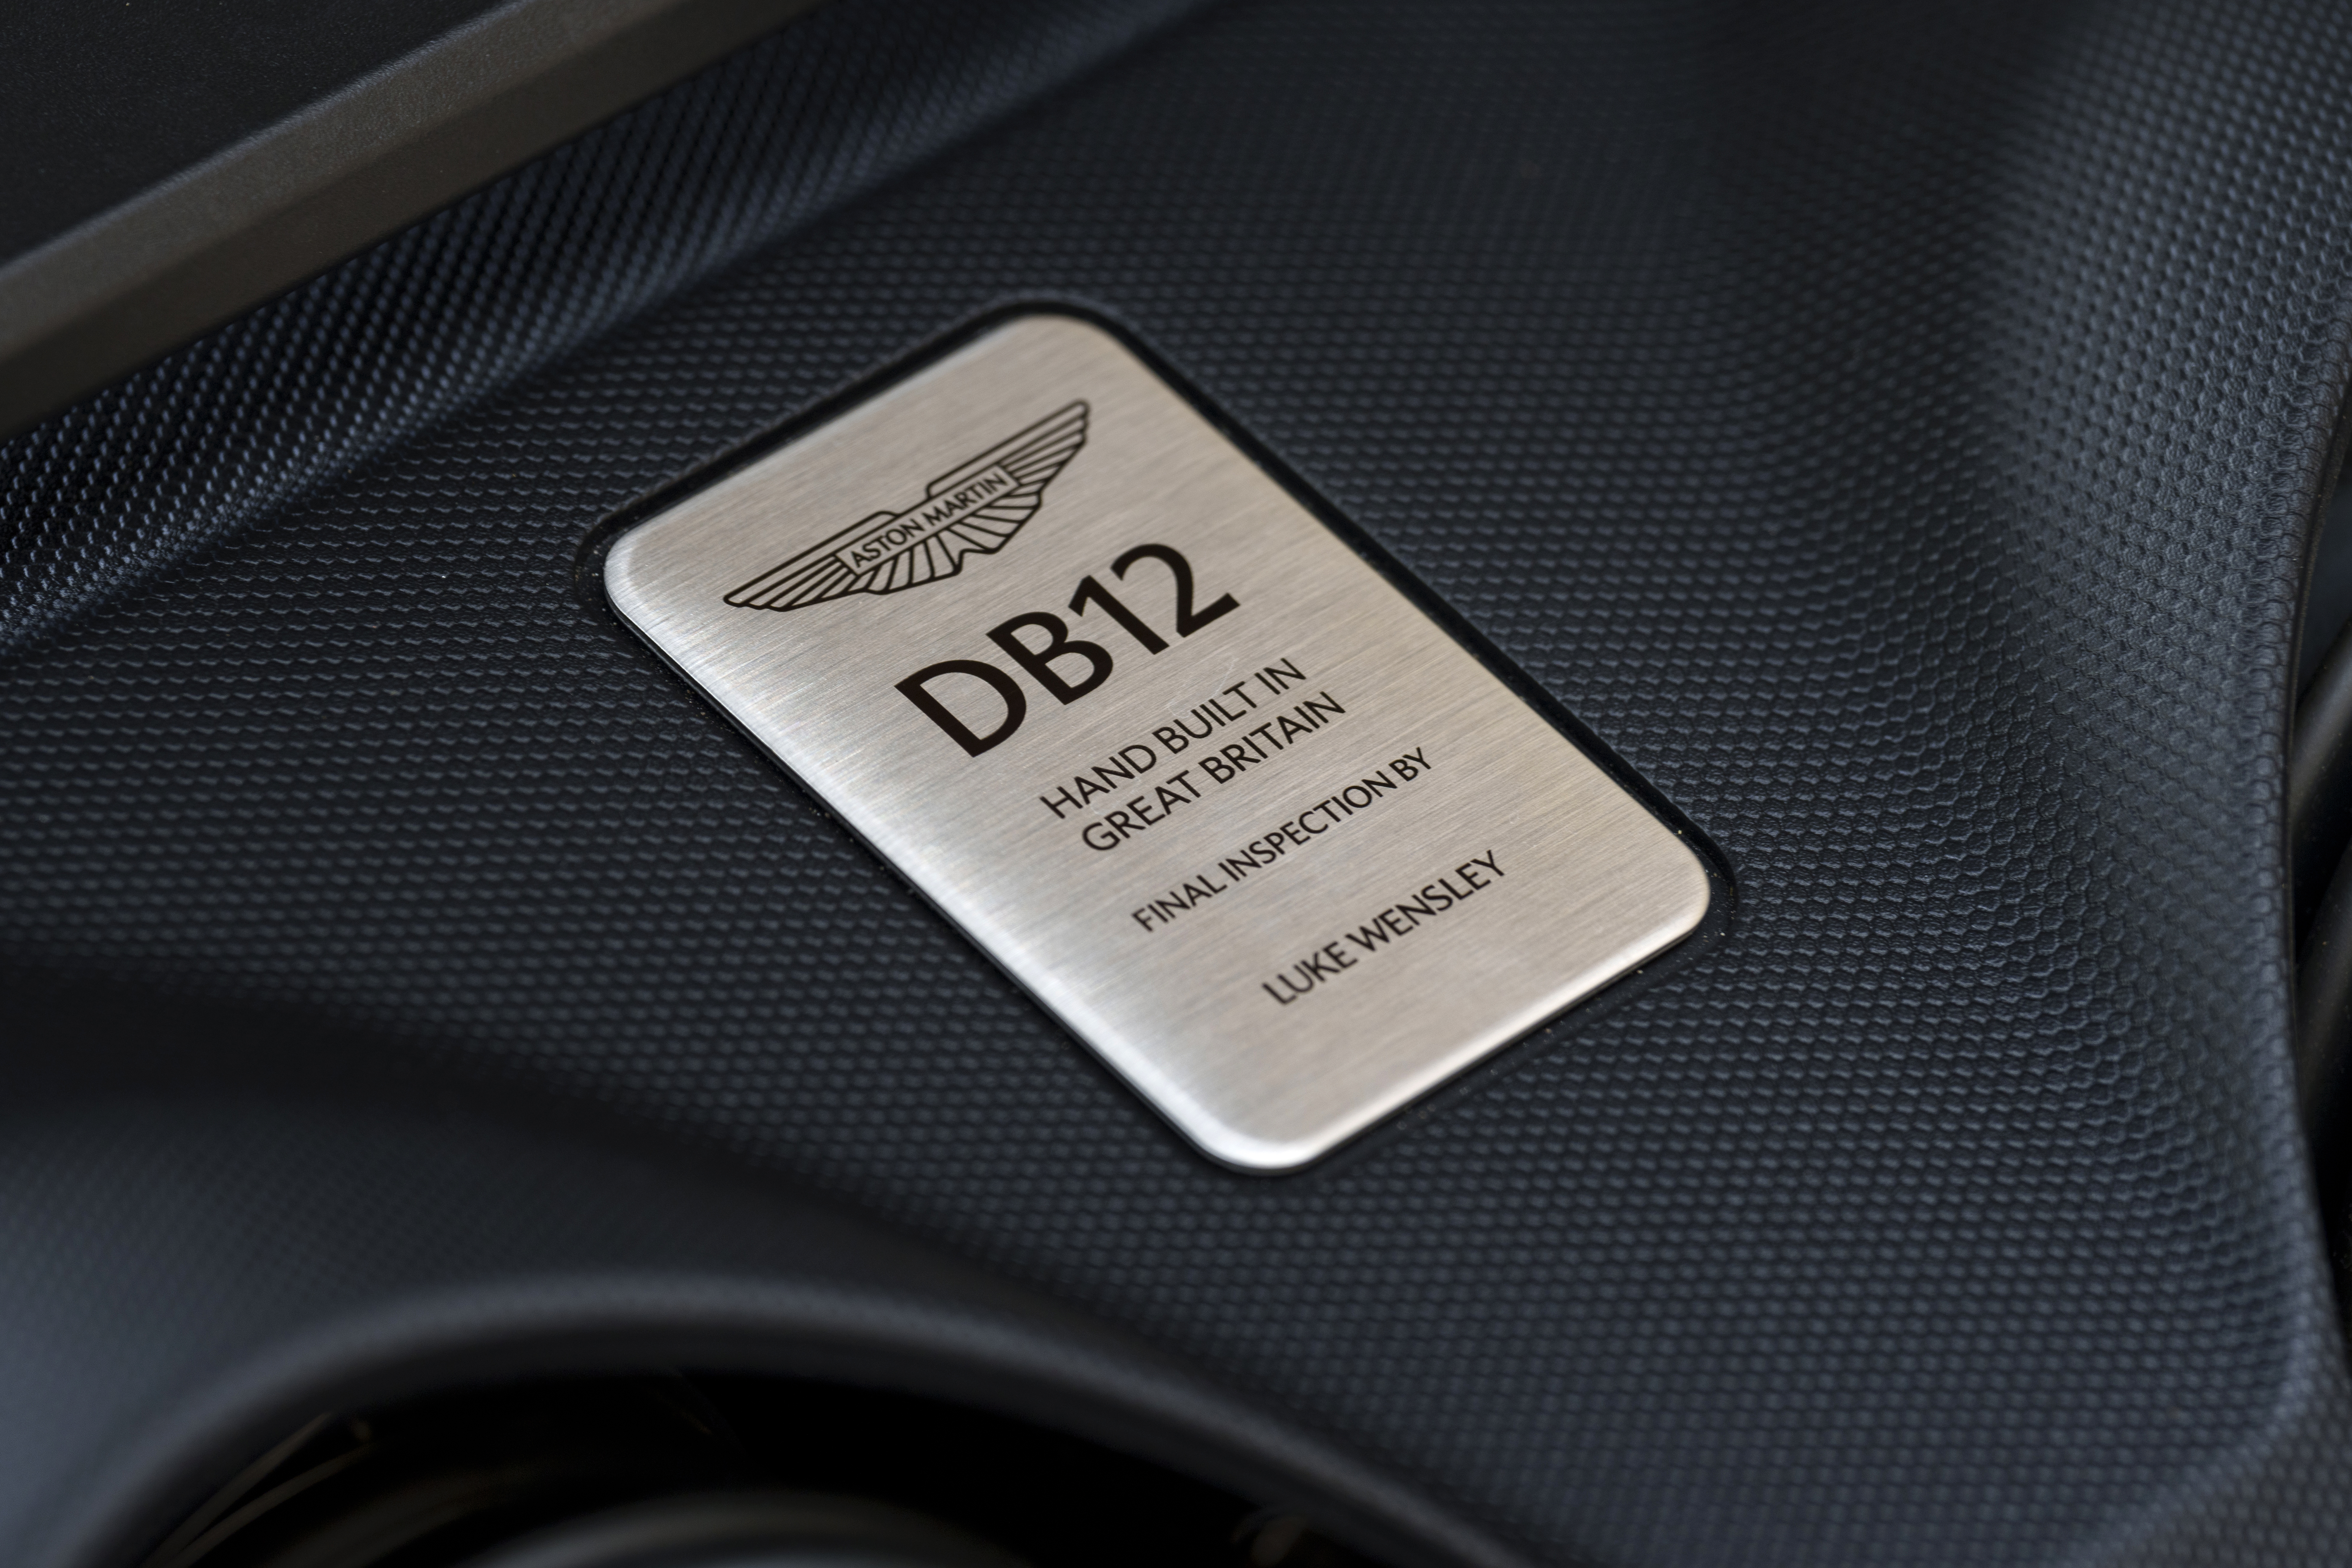 A small stainless steal plaque in the Aston Martin DB12 assures drivers of its quality, having been hand built in Great Britain and inspected